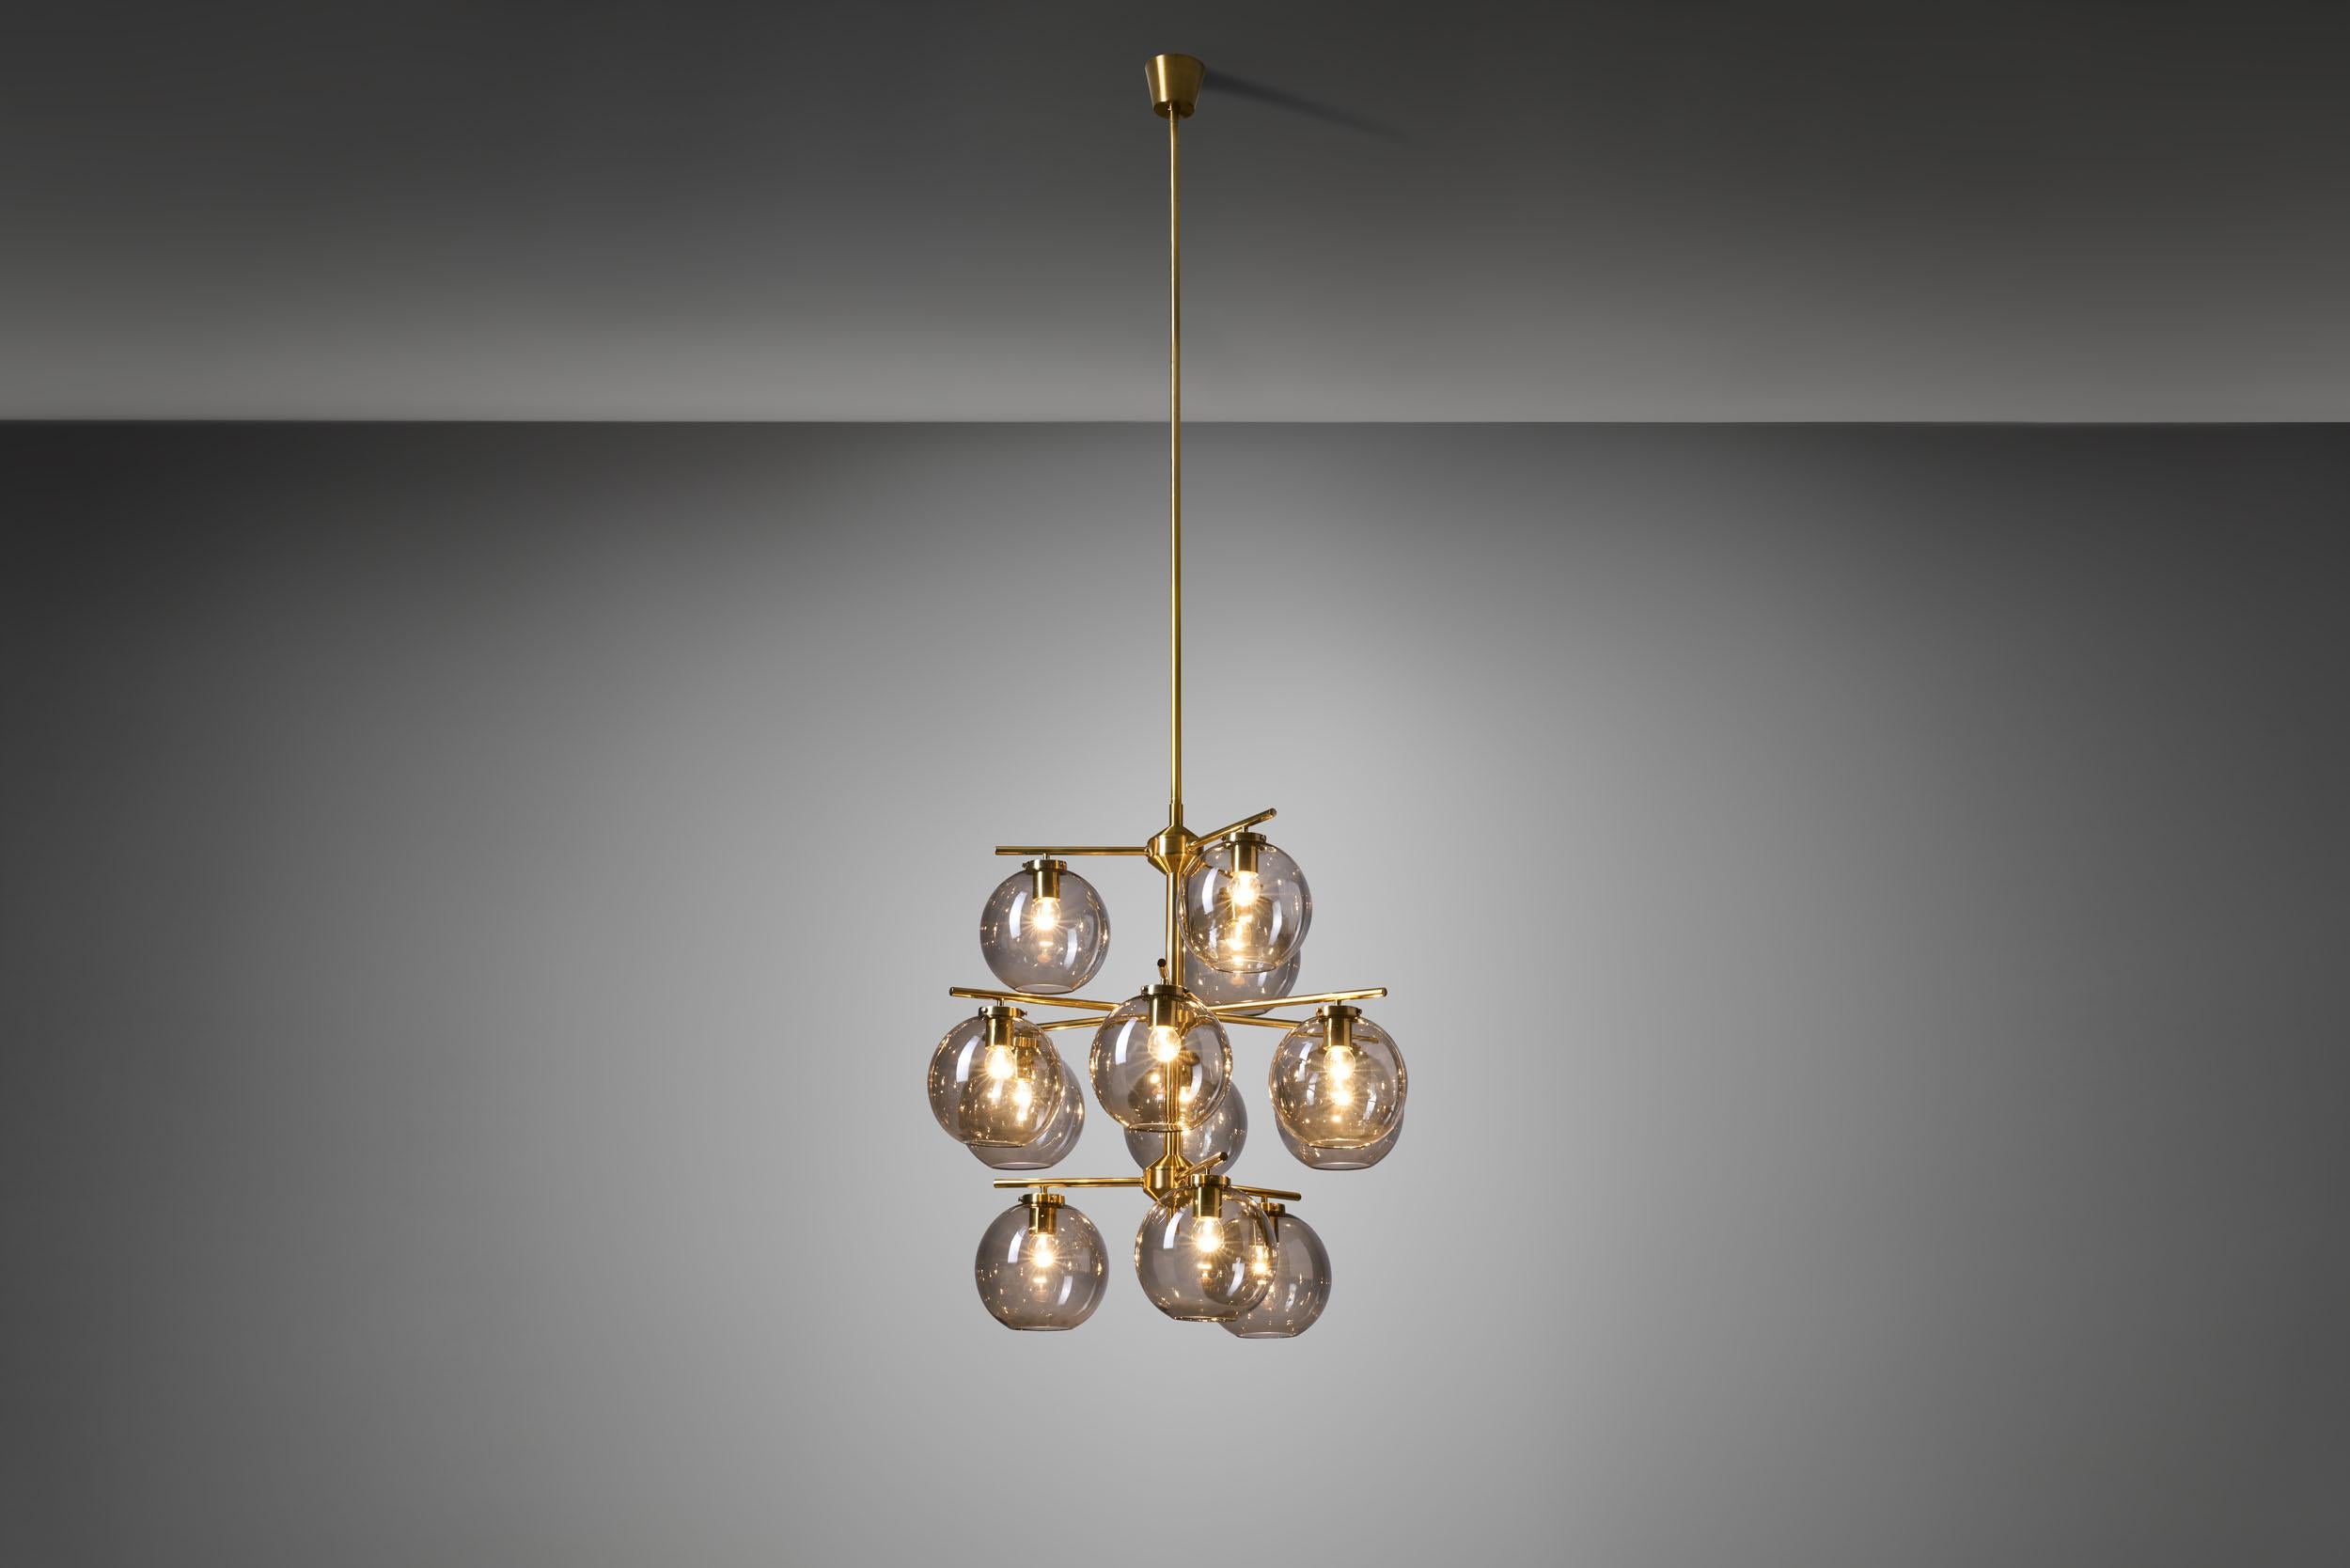 Swedish Holger Johansson Chandelier with 12 Smoked Glass Shades for Westal, Sweden 1960s